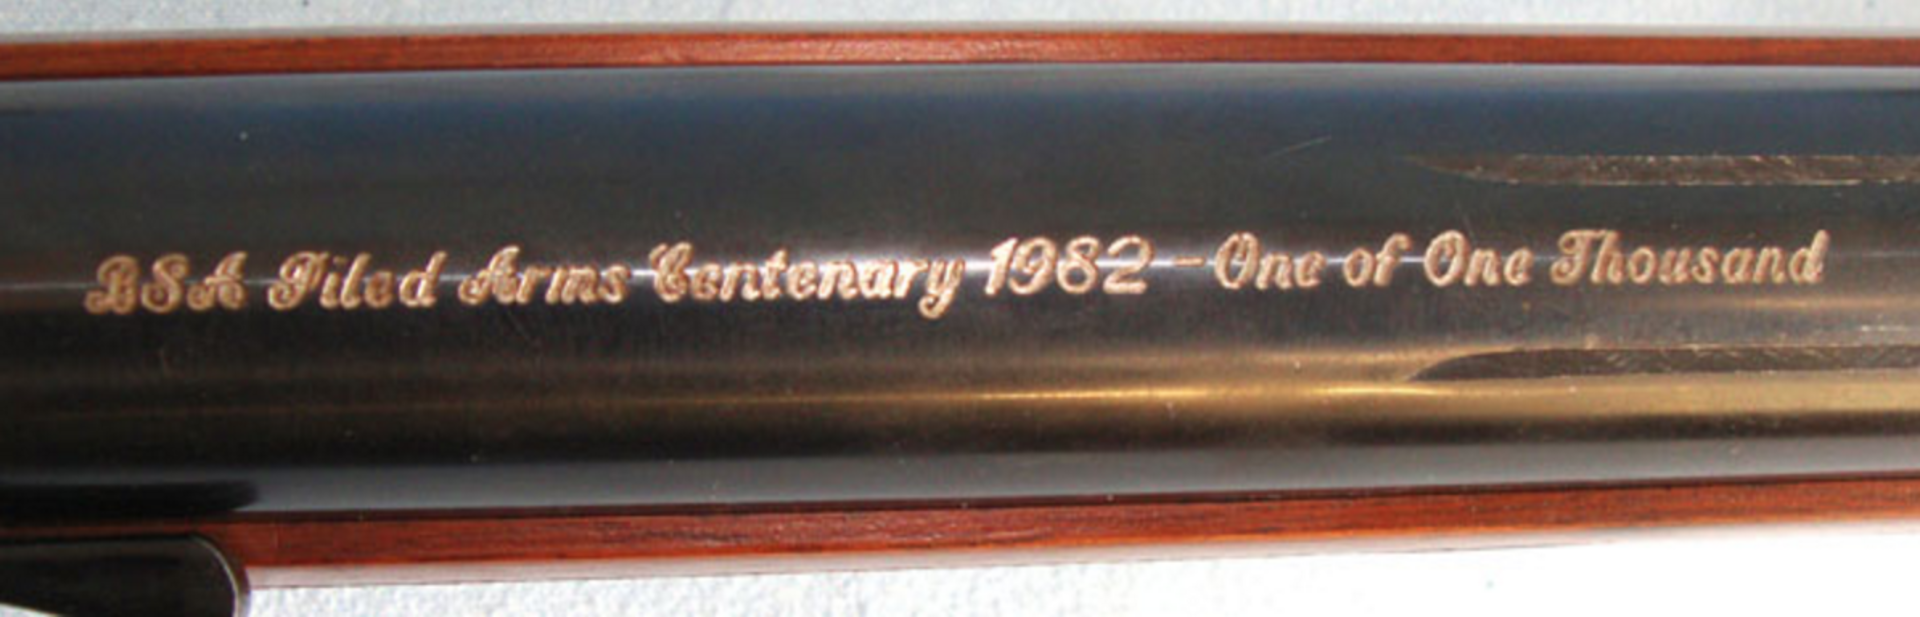 MINT, BSA Airsporter ‘BSA Piled Arms Centenary 1982 One Of One Thousand’, Commemorative Air Rifle - Image 2 of 3